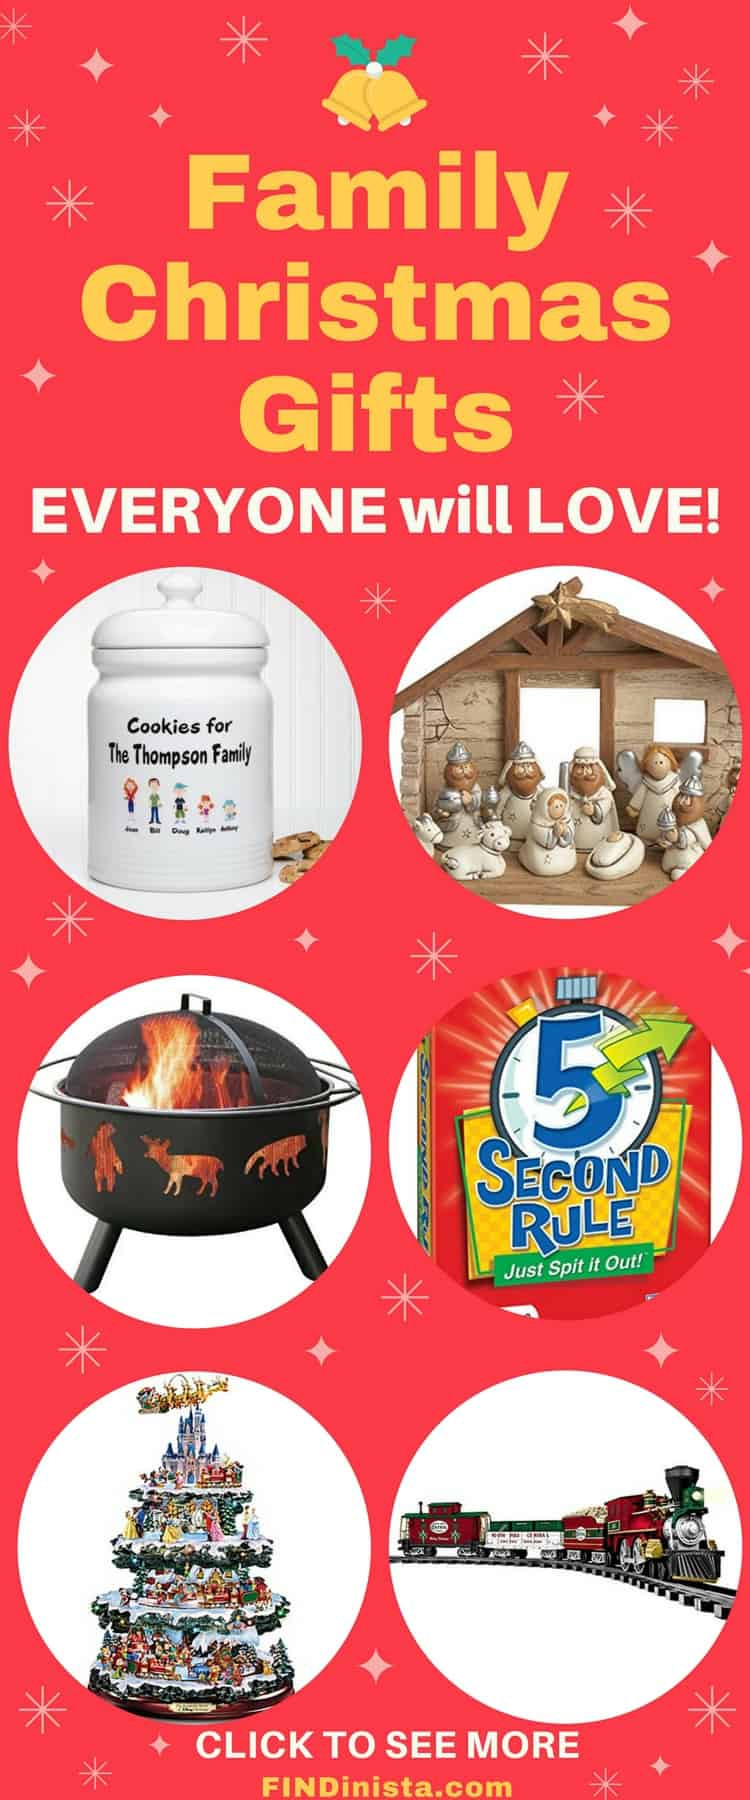 Christmas Gift Ideas For Families
 Best Family Gift Ideas for Christmas Fun Gifts the Whole